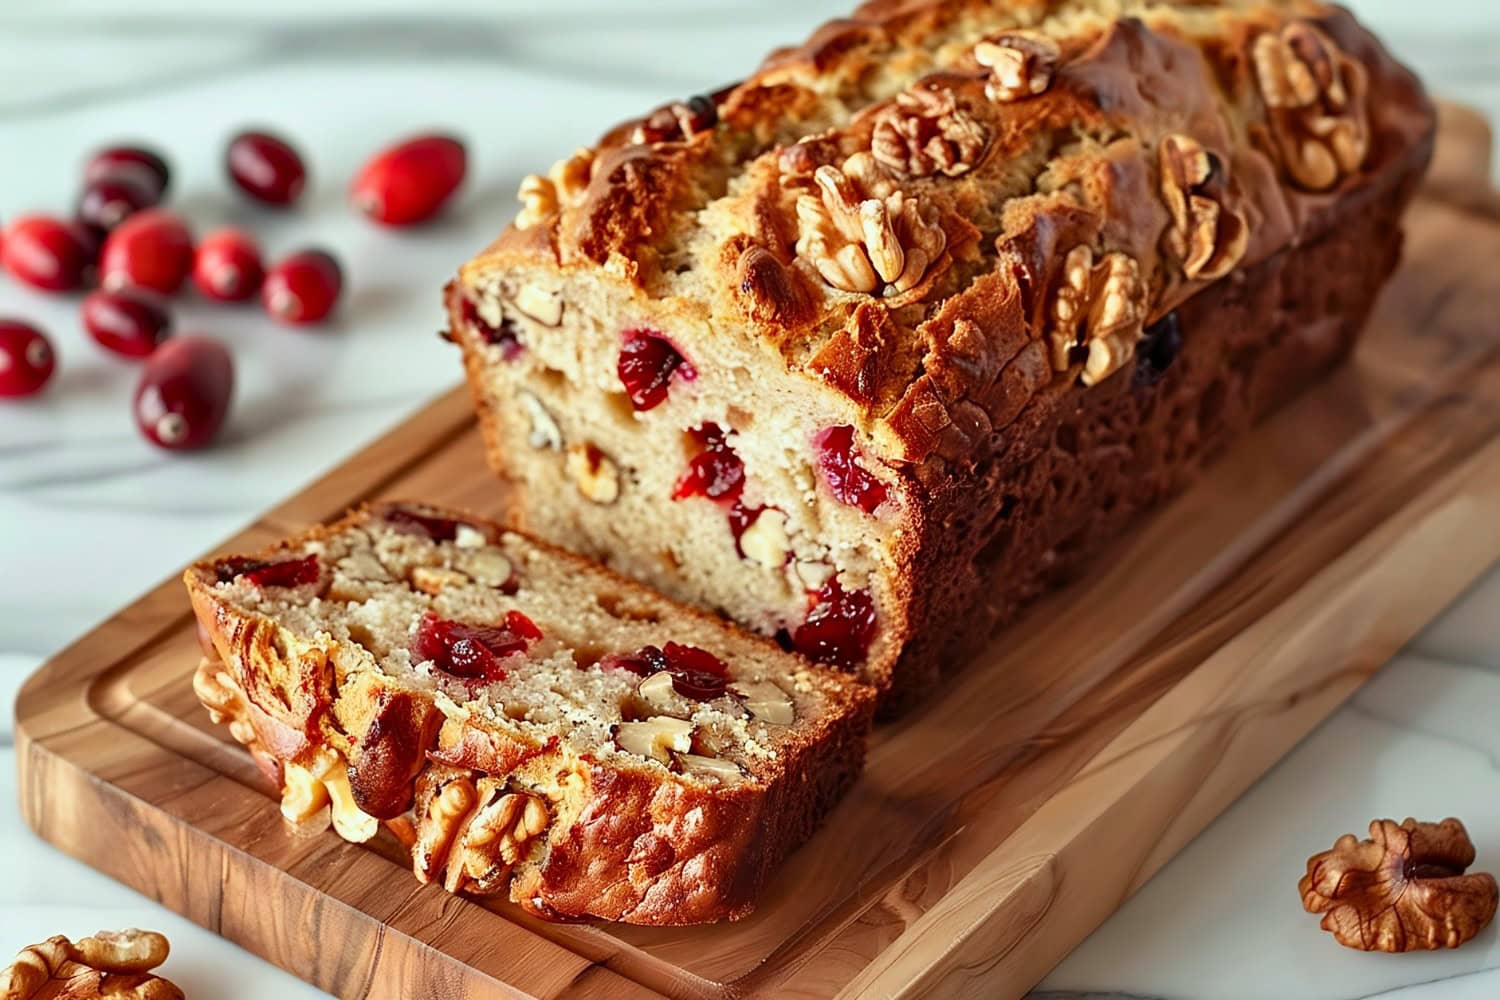 Loaf of Cranberry Orange Bread with a Slice Cut on a Wooden Cutting Board with Whole Cranberries and Walnuts